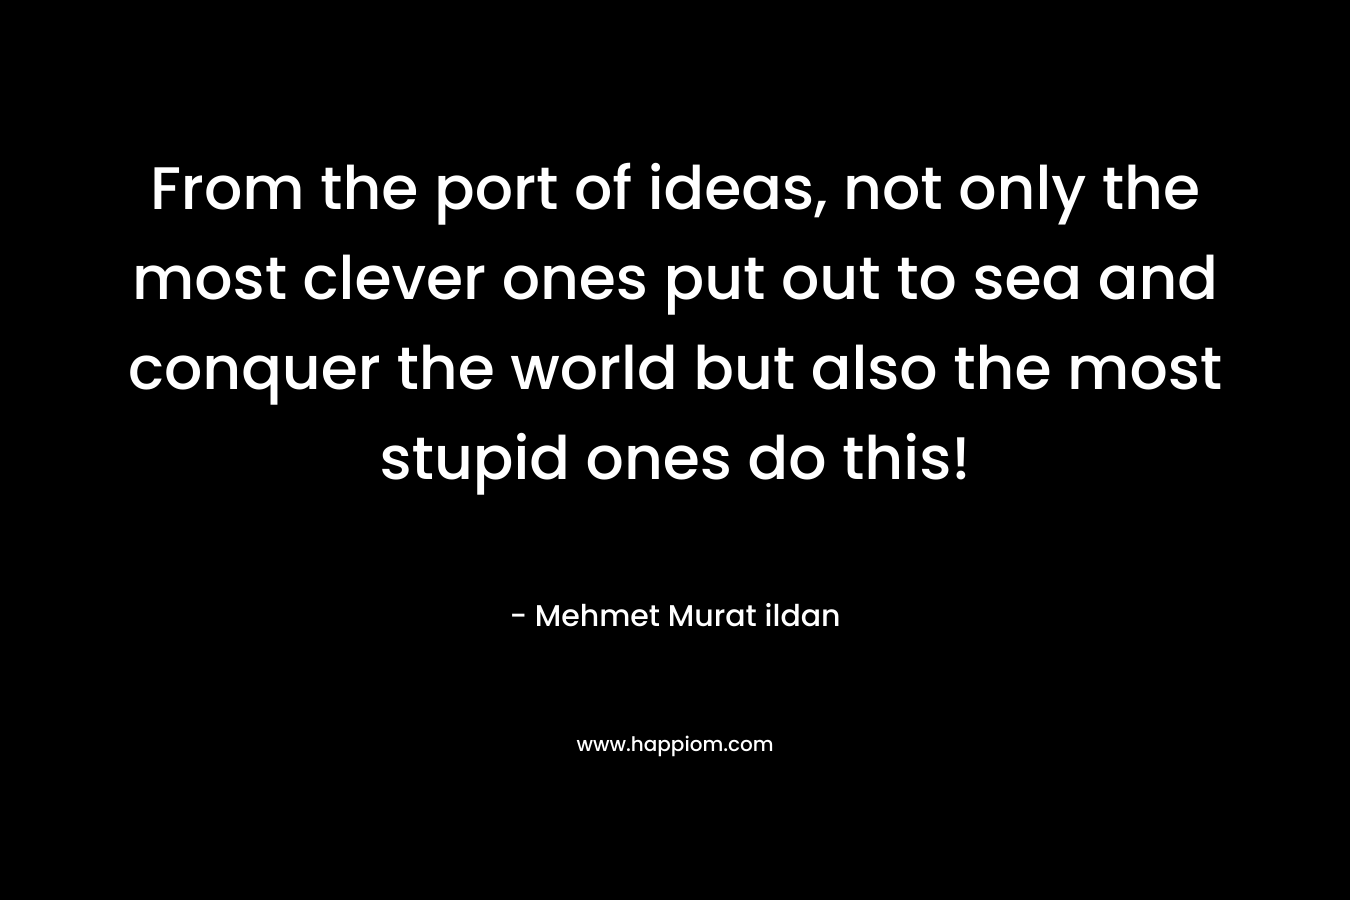 From the port of ideas, not only the most clever ones put out to sea and conquer the world but also the most stupid ones do this!